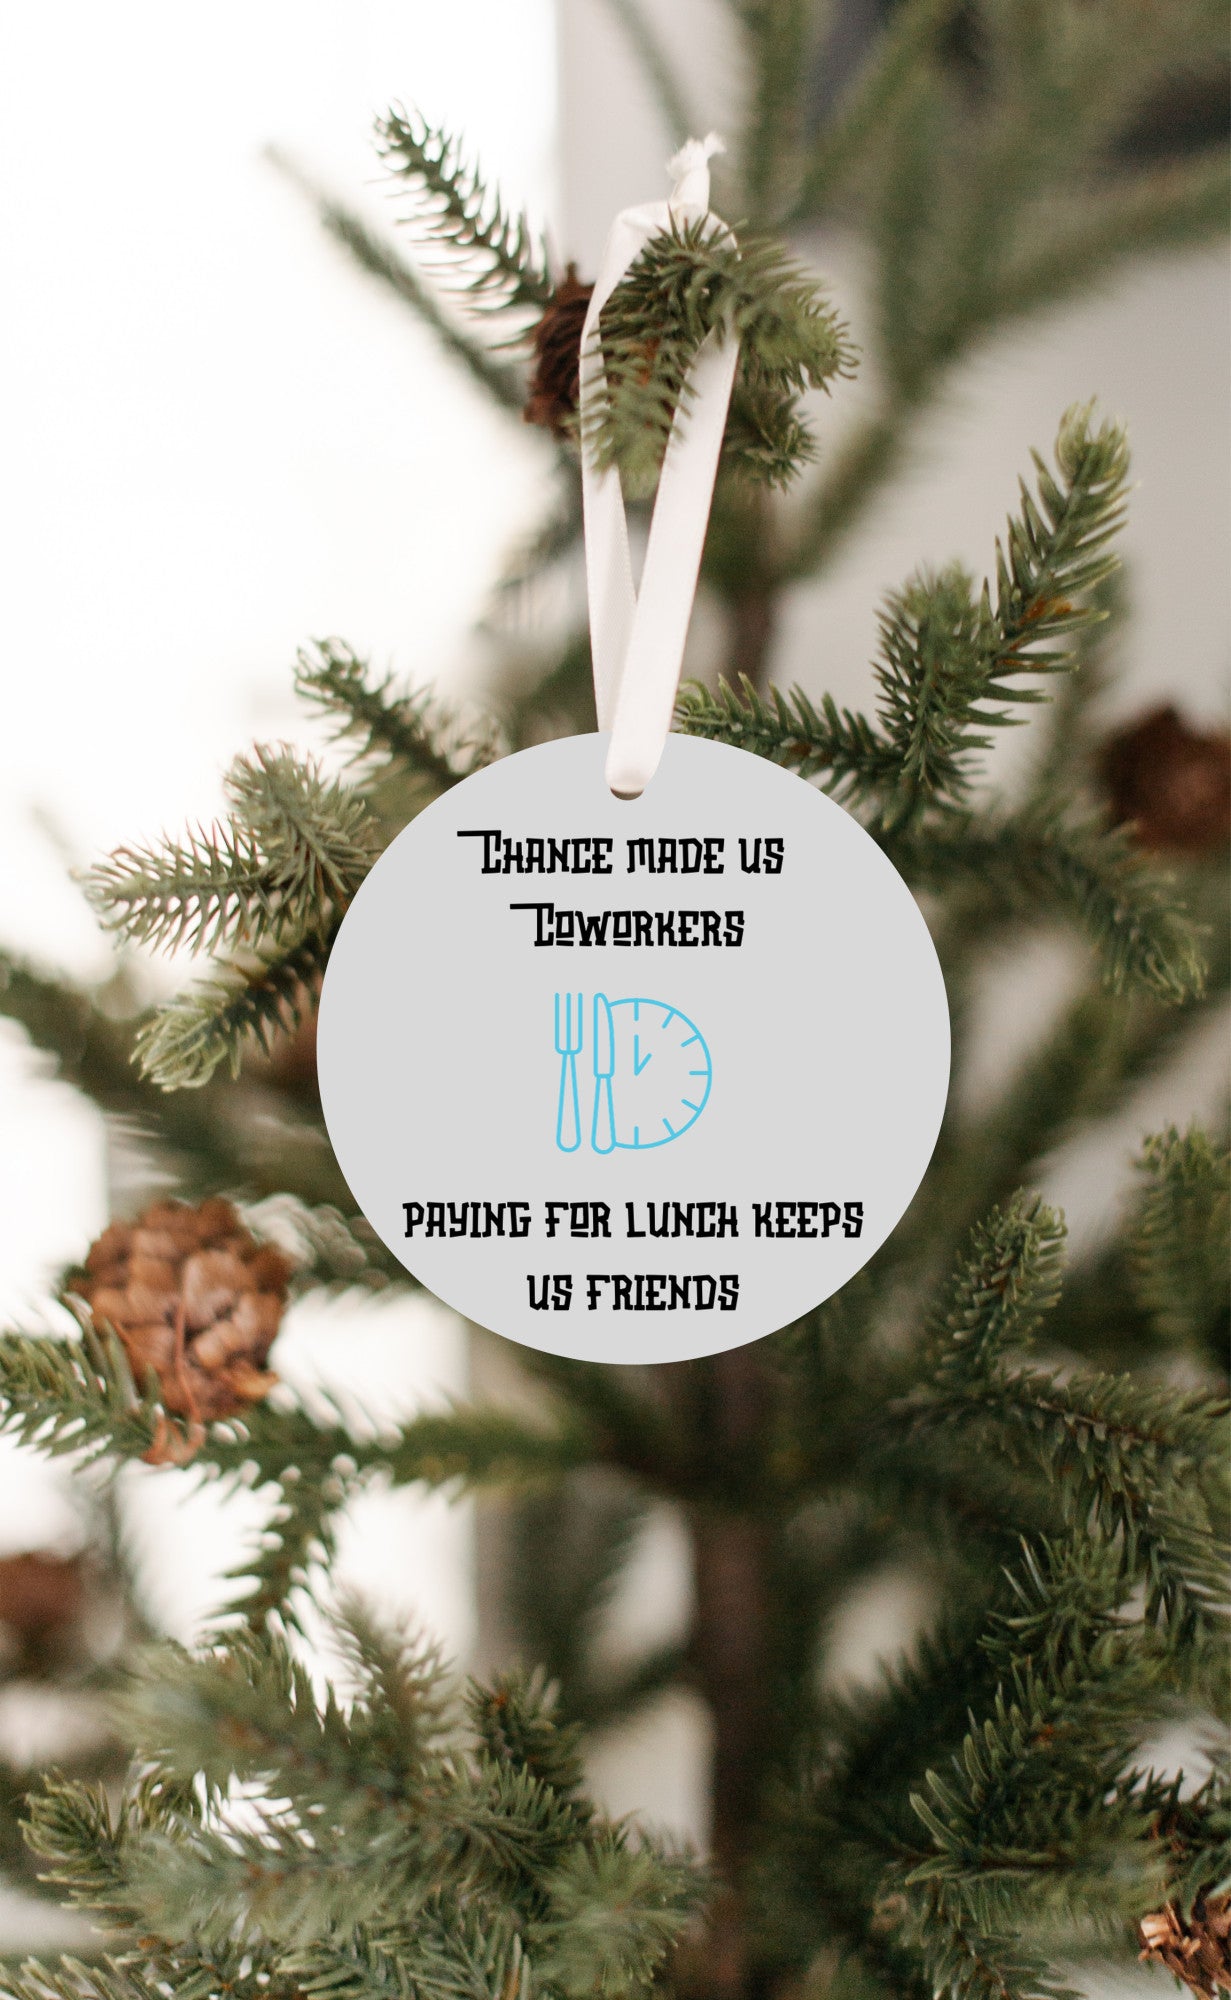 Chance made us Coworker, paying for lunch keeps us friends - Christmas ornament